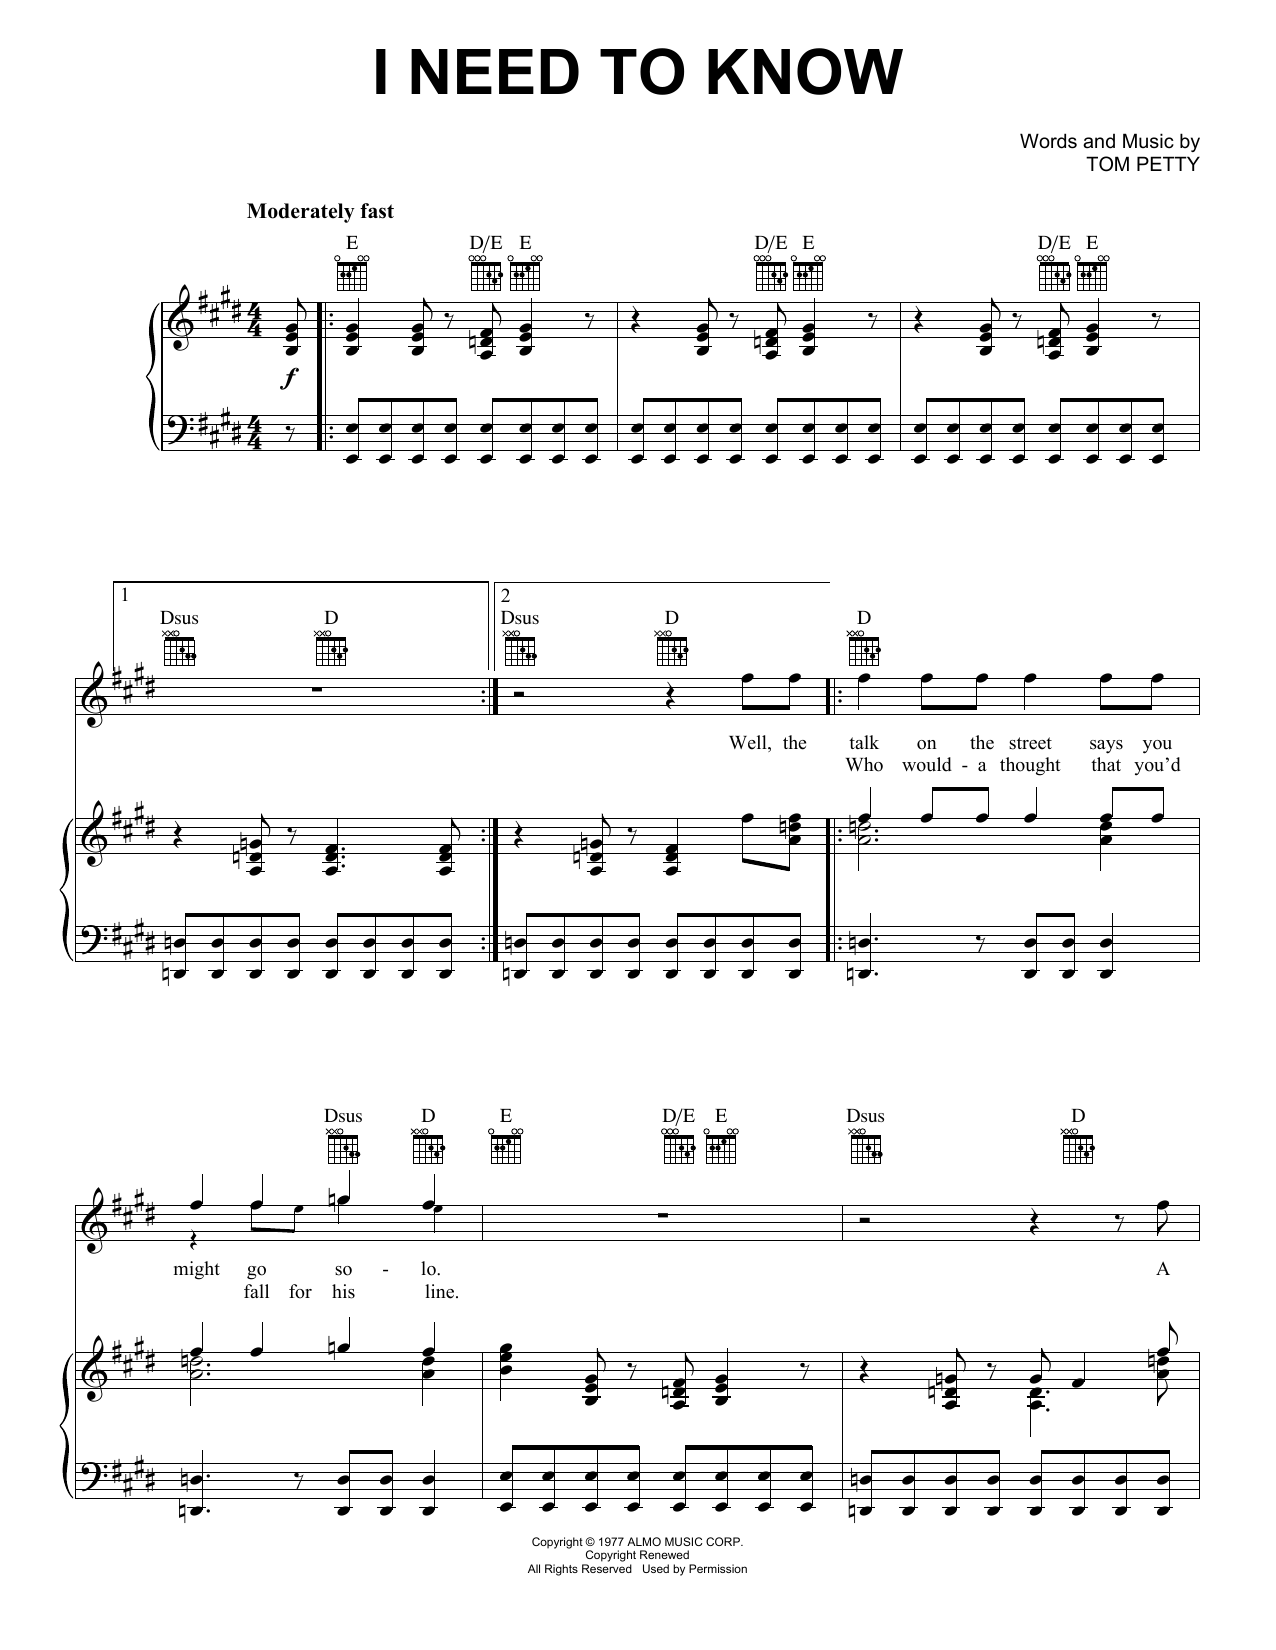 Tom Petty And The Heartbreakers I Need To Know sheet music notes and chords. Download Printable PDF.